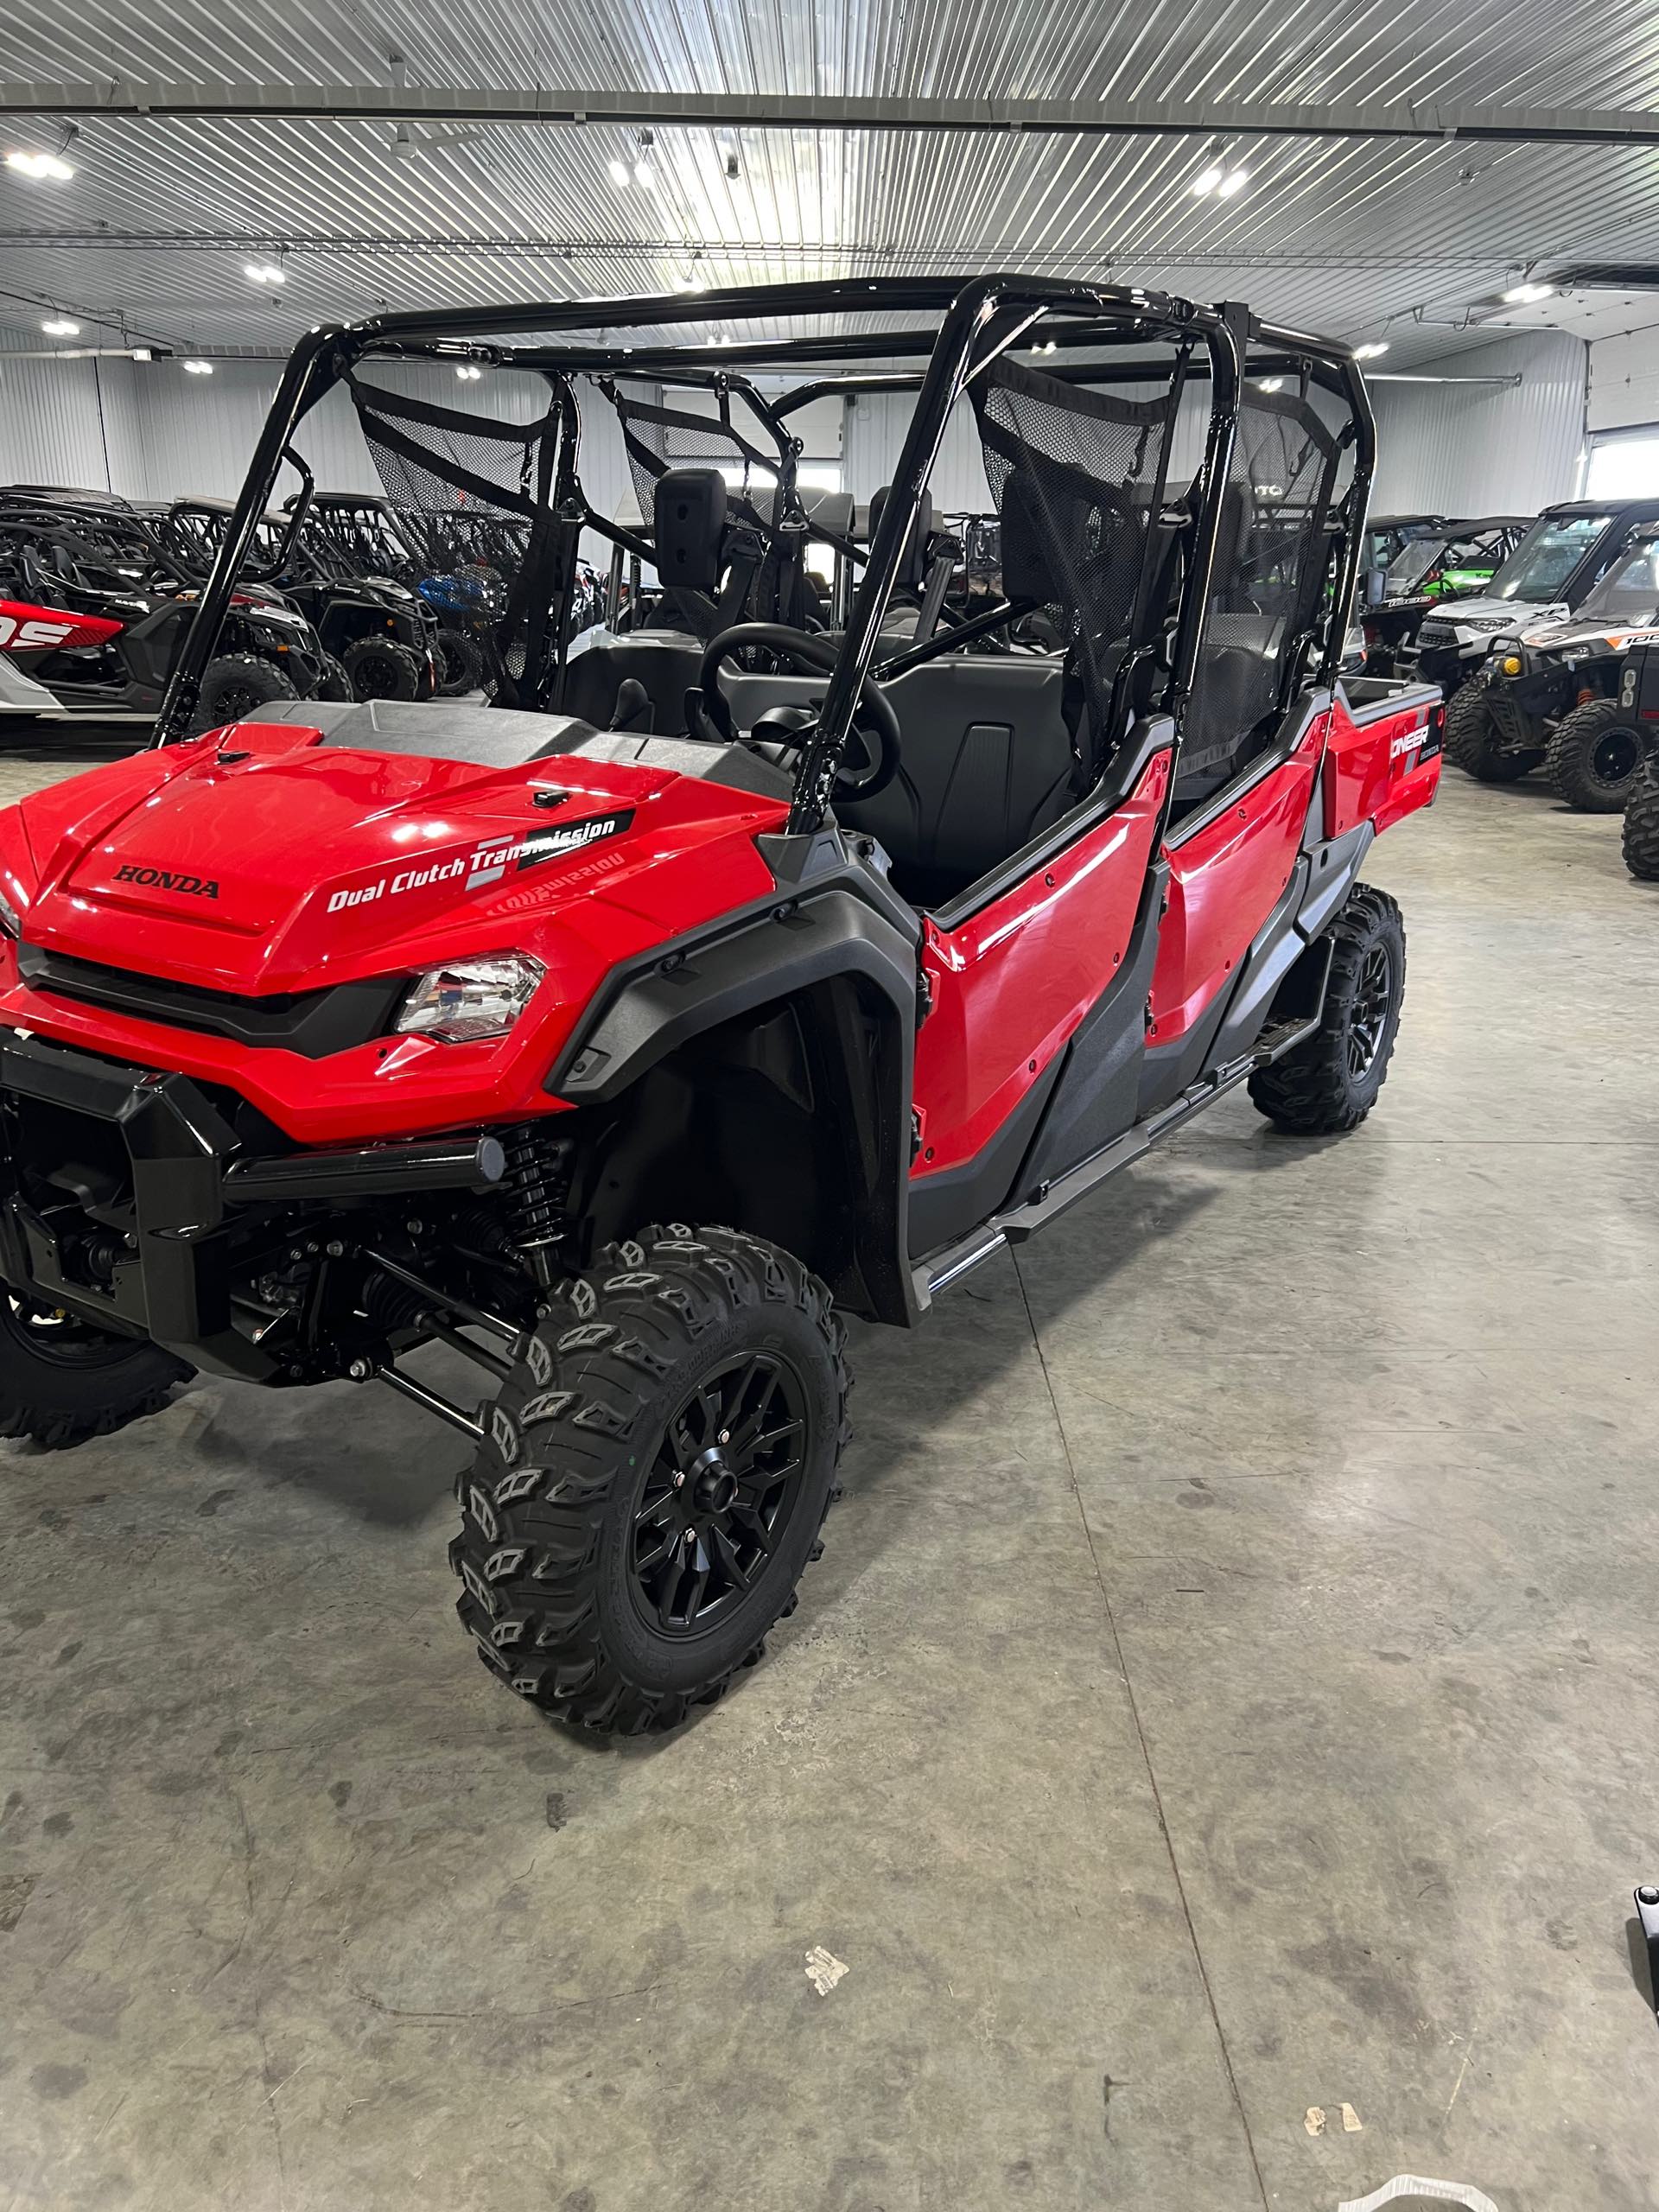 2023 Honda Pioneer 1000-6 Crew Deluxe at Iron Hill Powersports